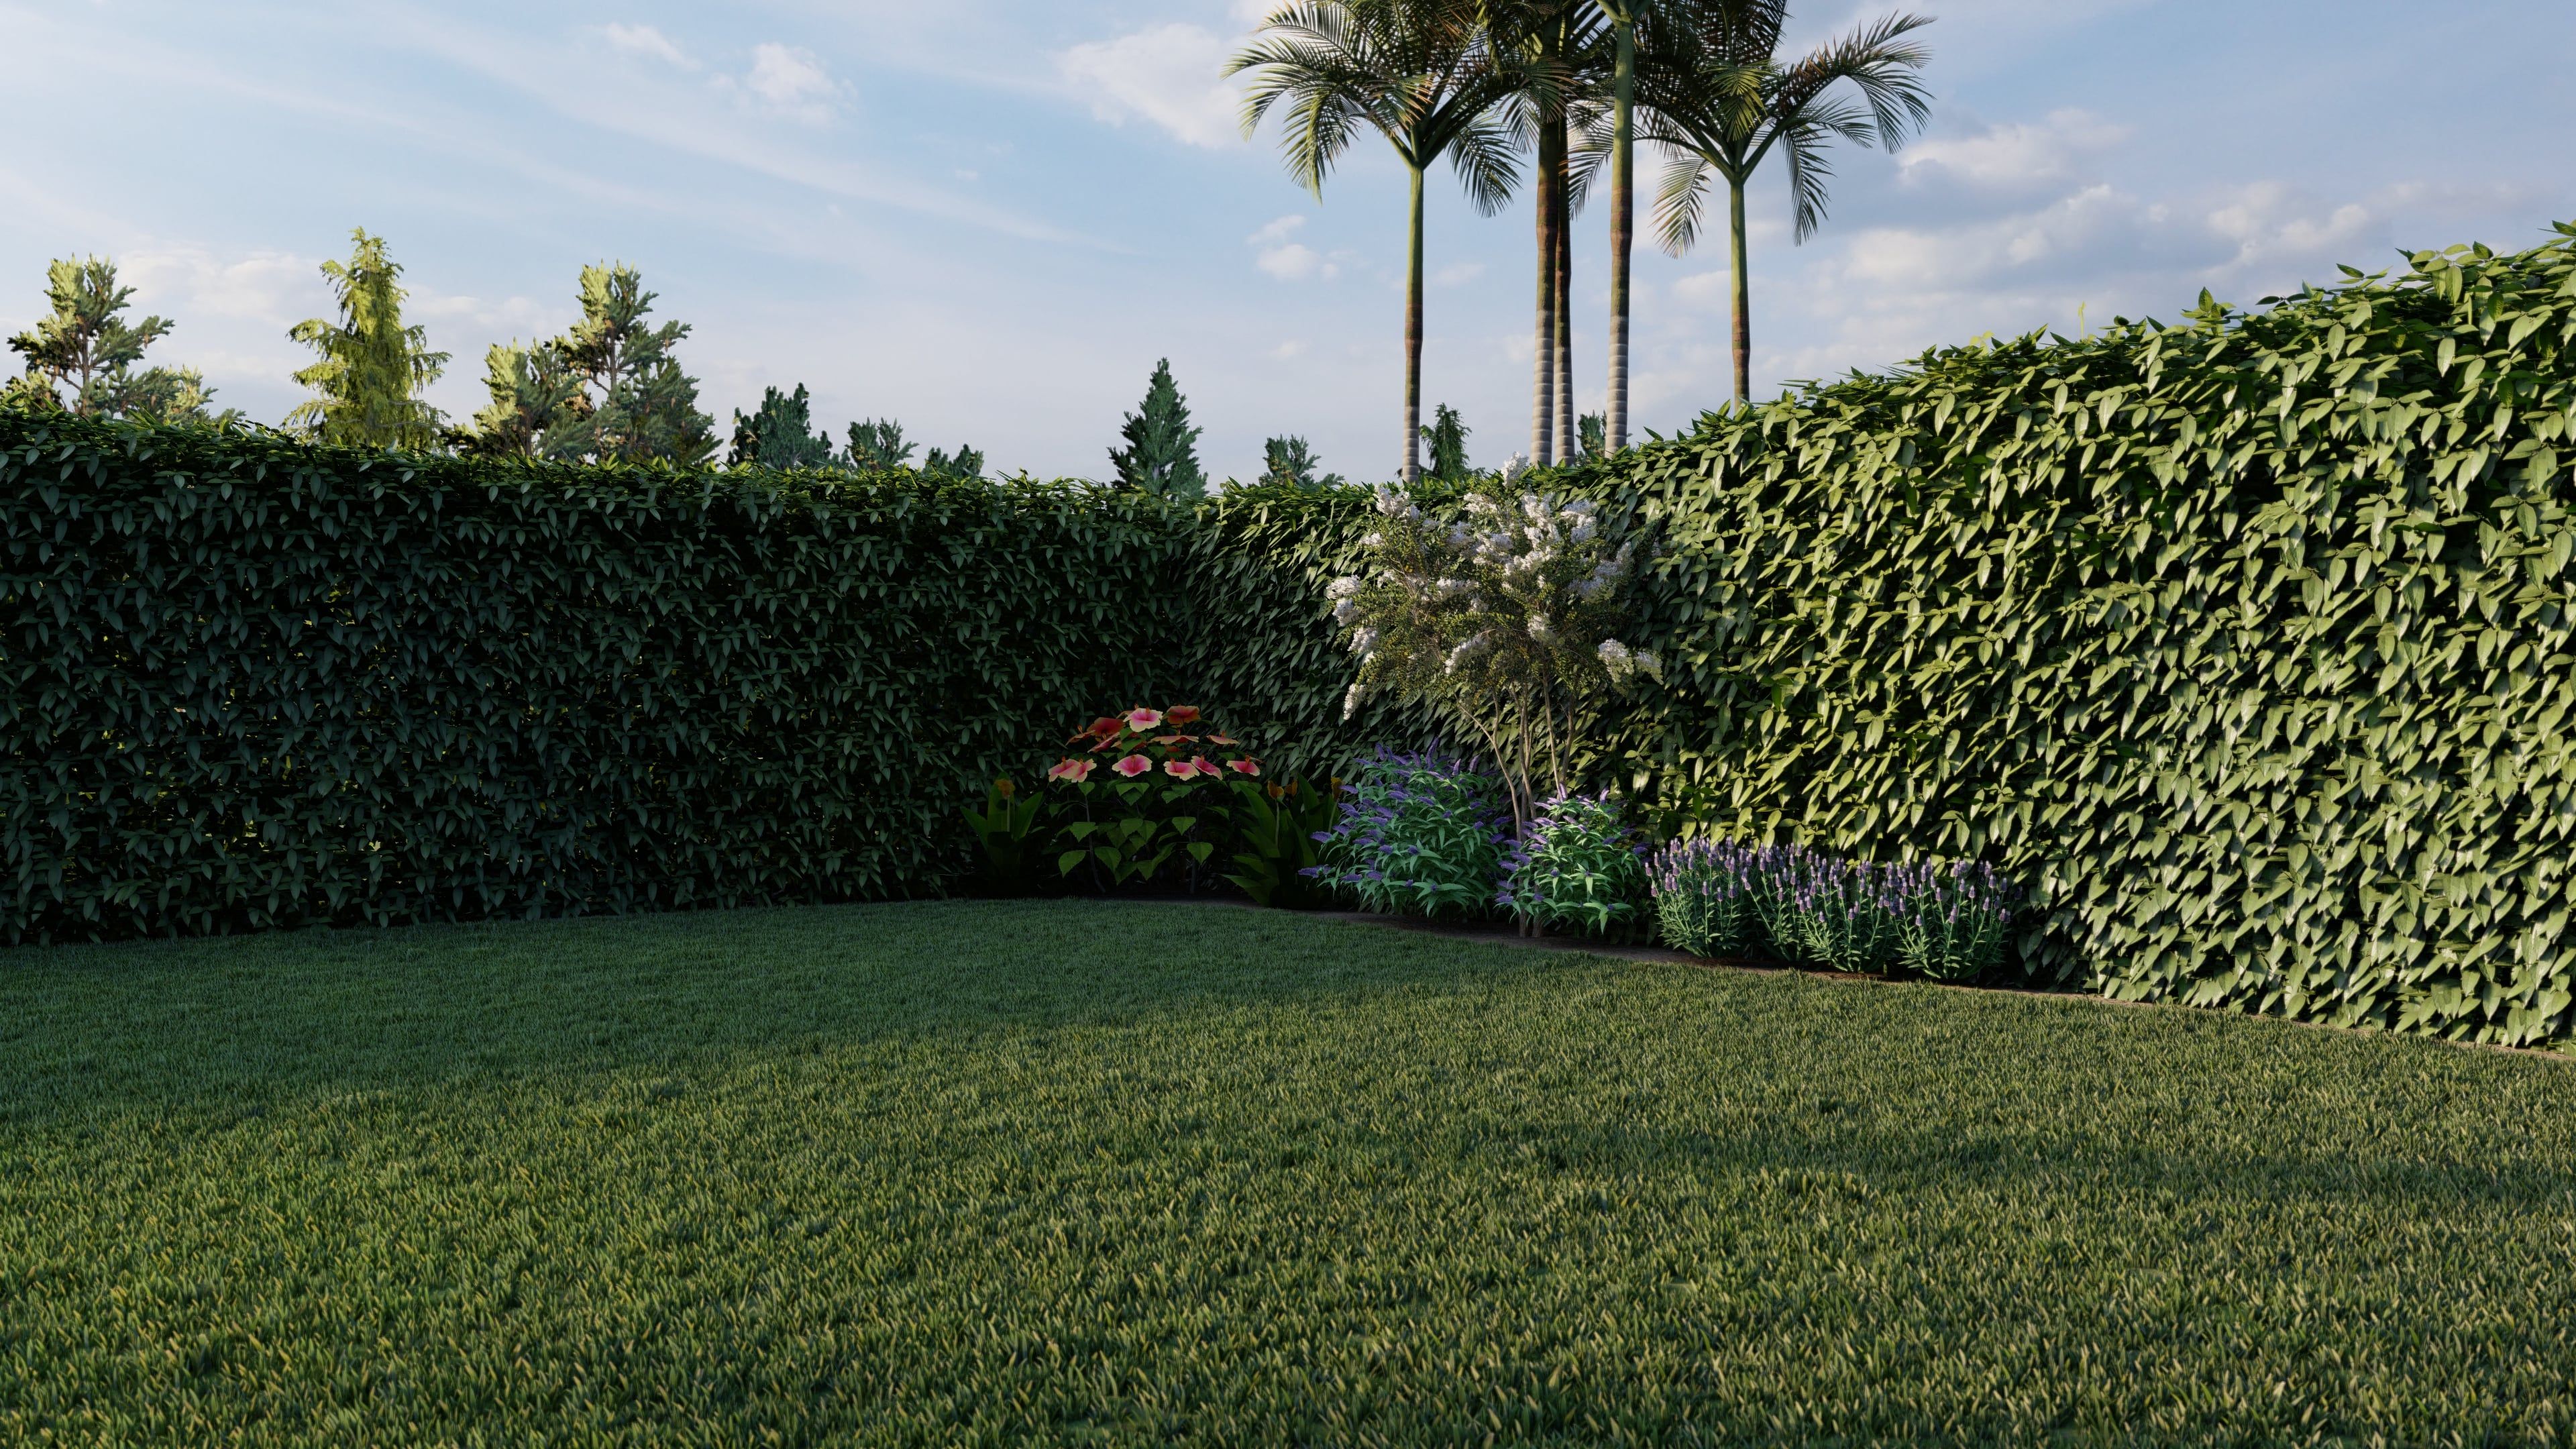 backyard landscaping ideas add privacy through hedges